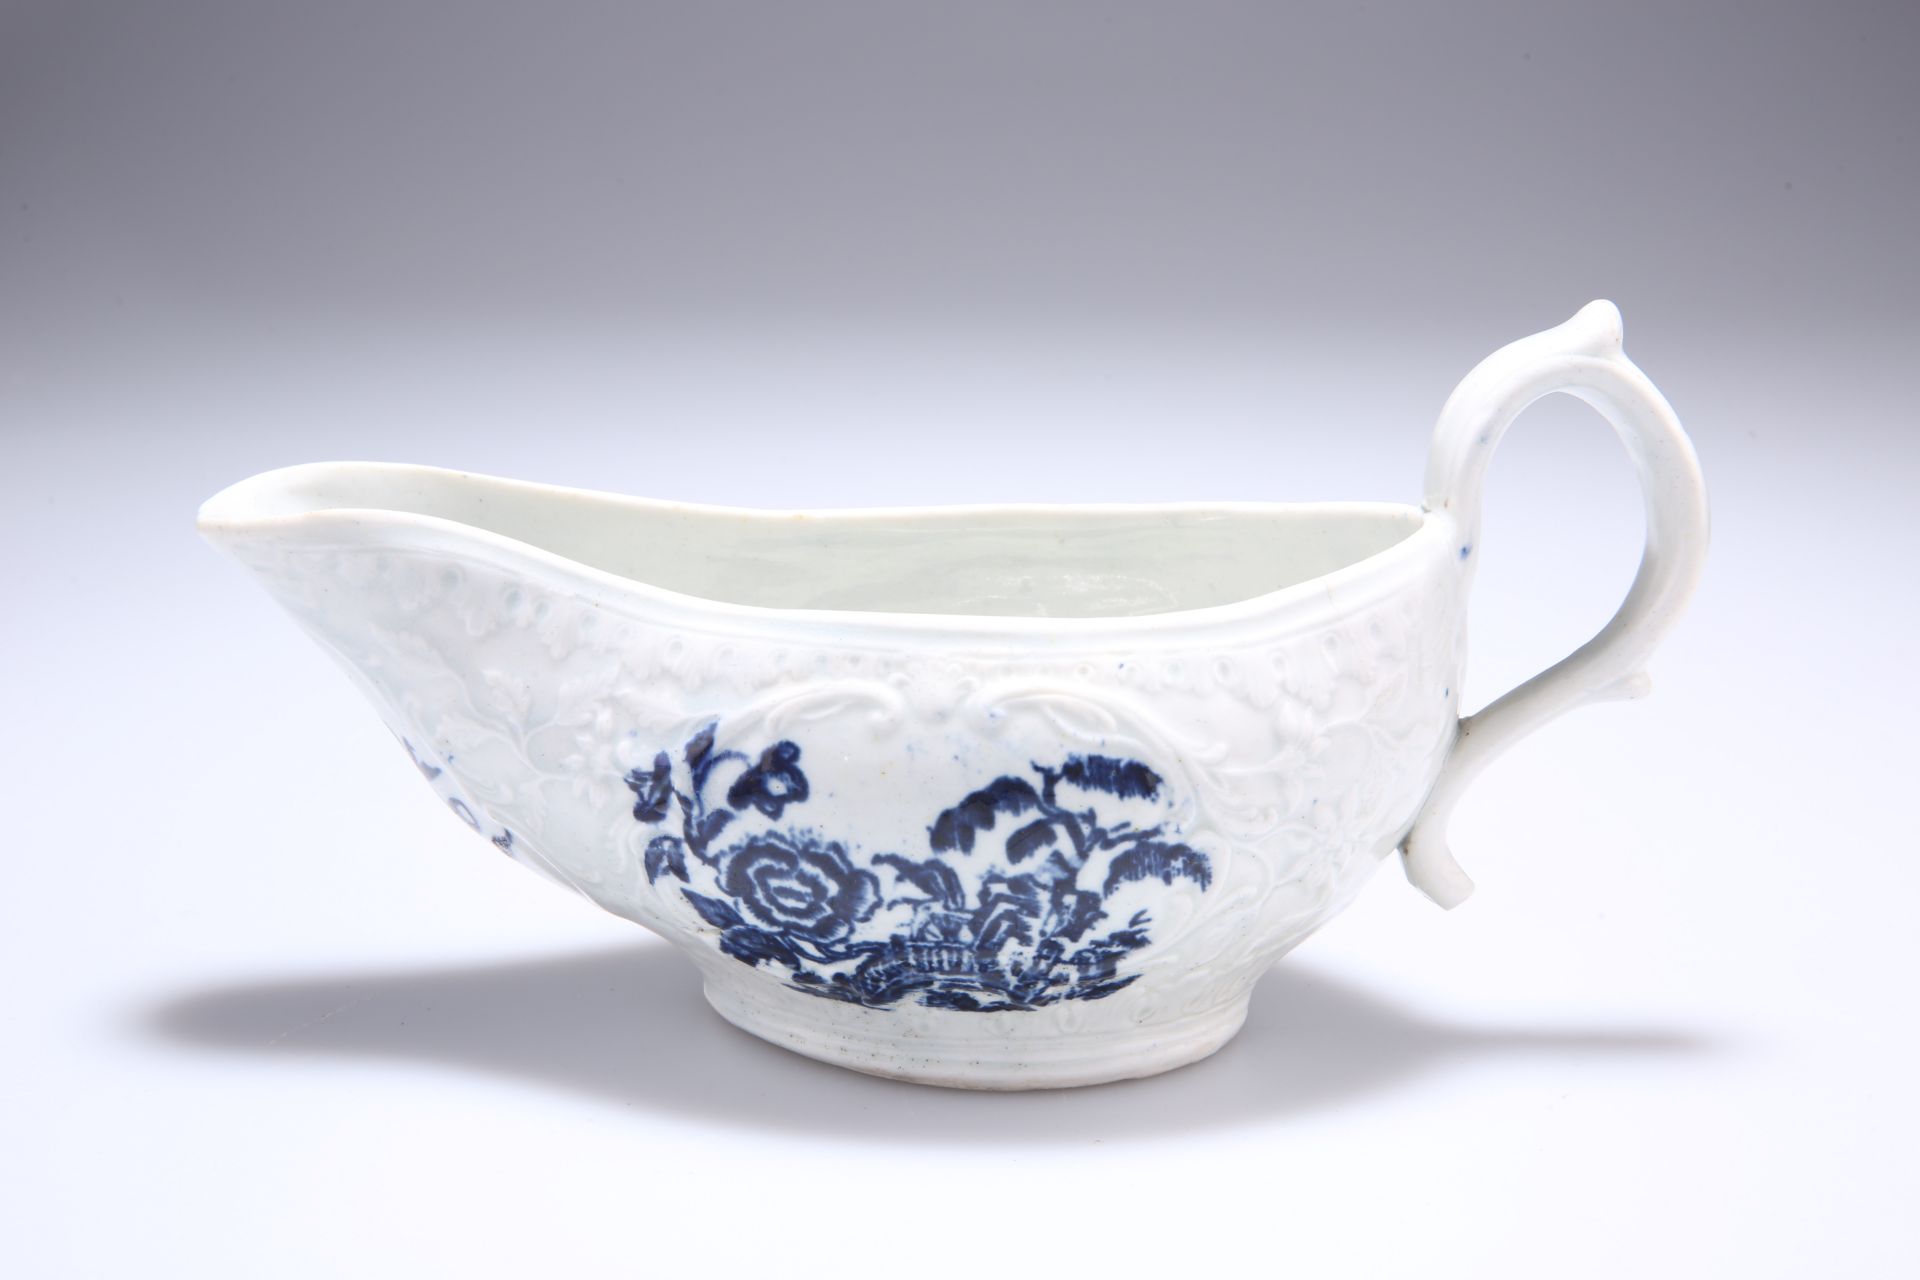 A SETH PENNINGTON LIVERPOOL MOULDED SAUCE BOAT, CIRCA 1785-90, blue printed with the Peony and Fence